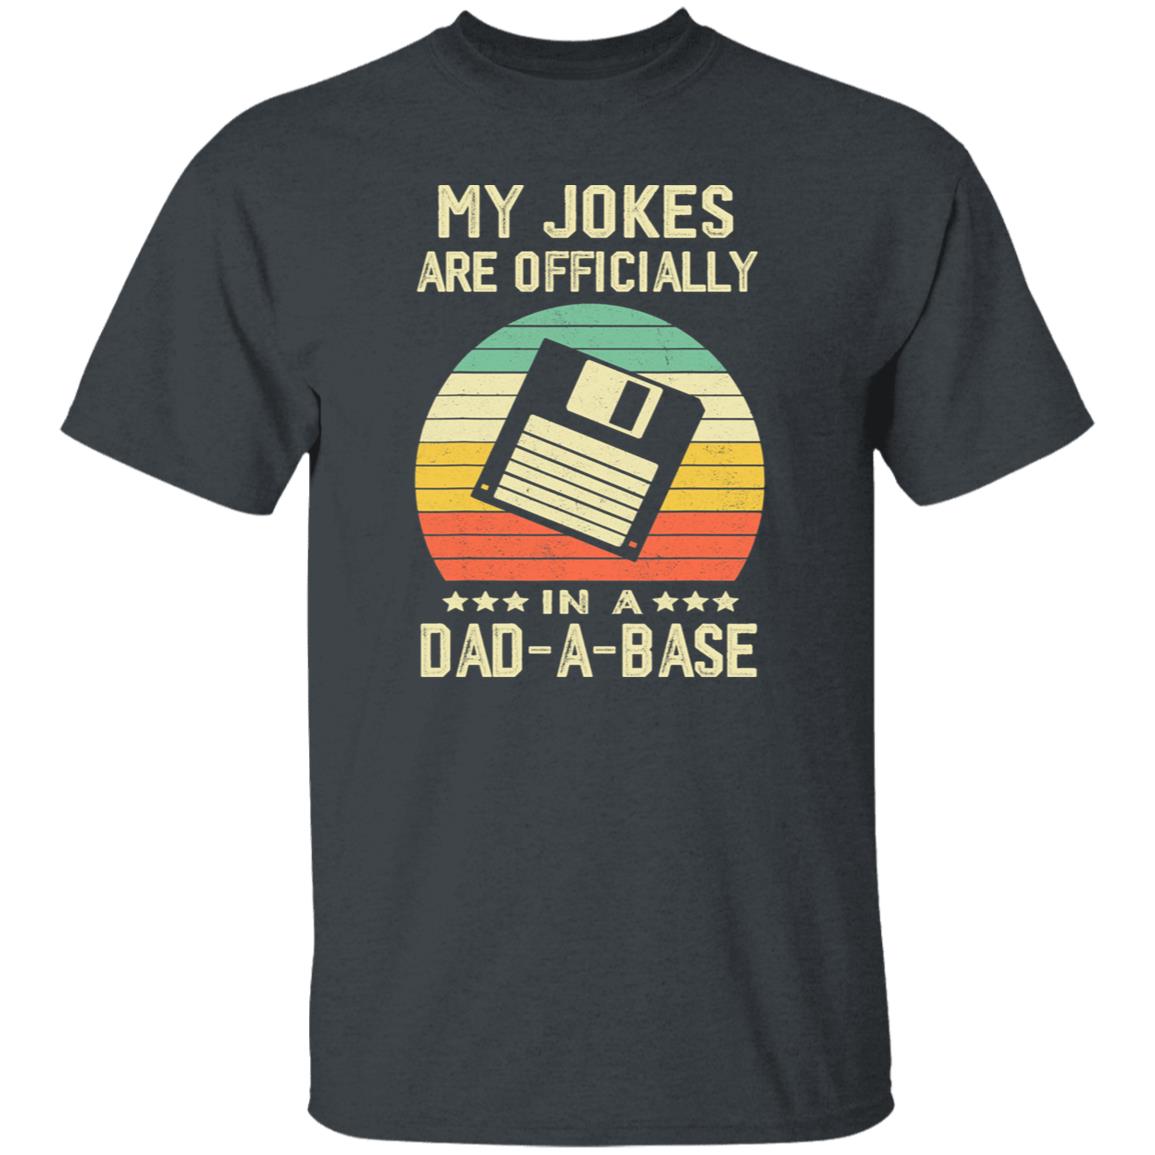 My Jokes Are Officially in a Dad-a-Base Funny Shirt For Dad